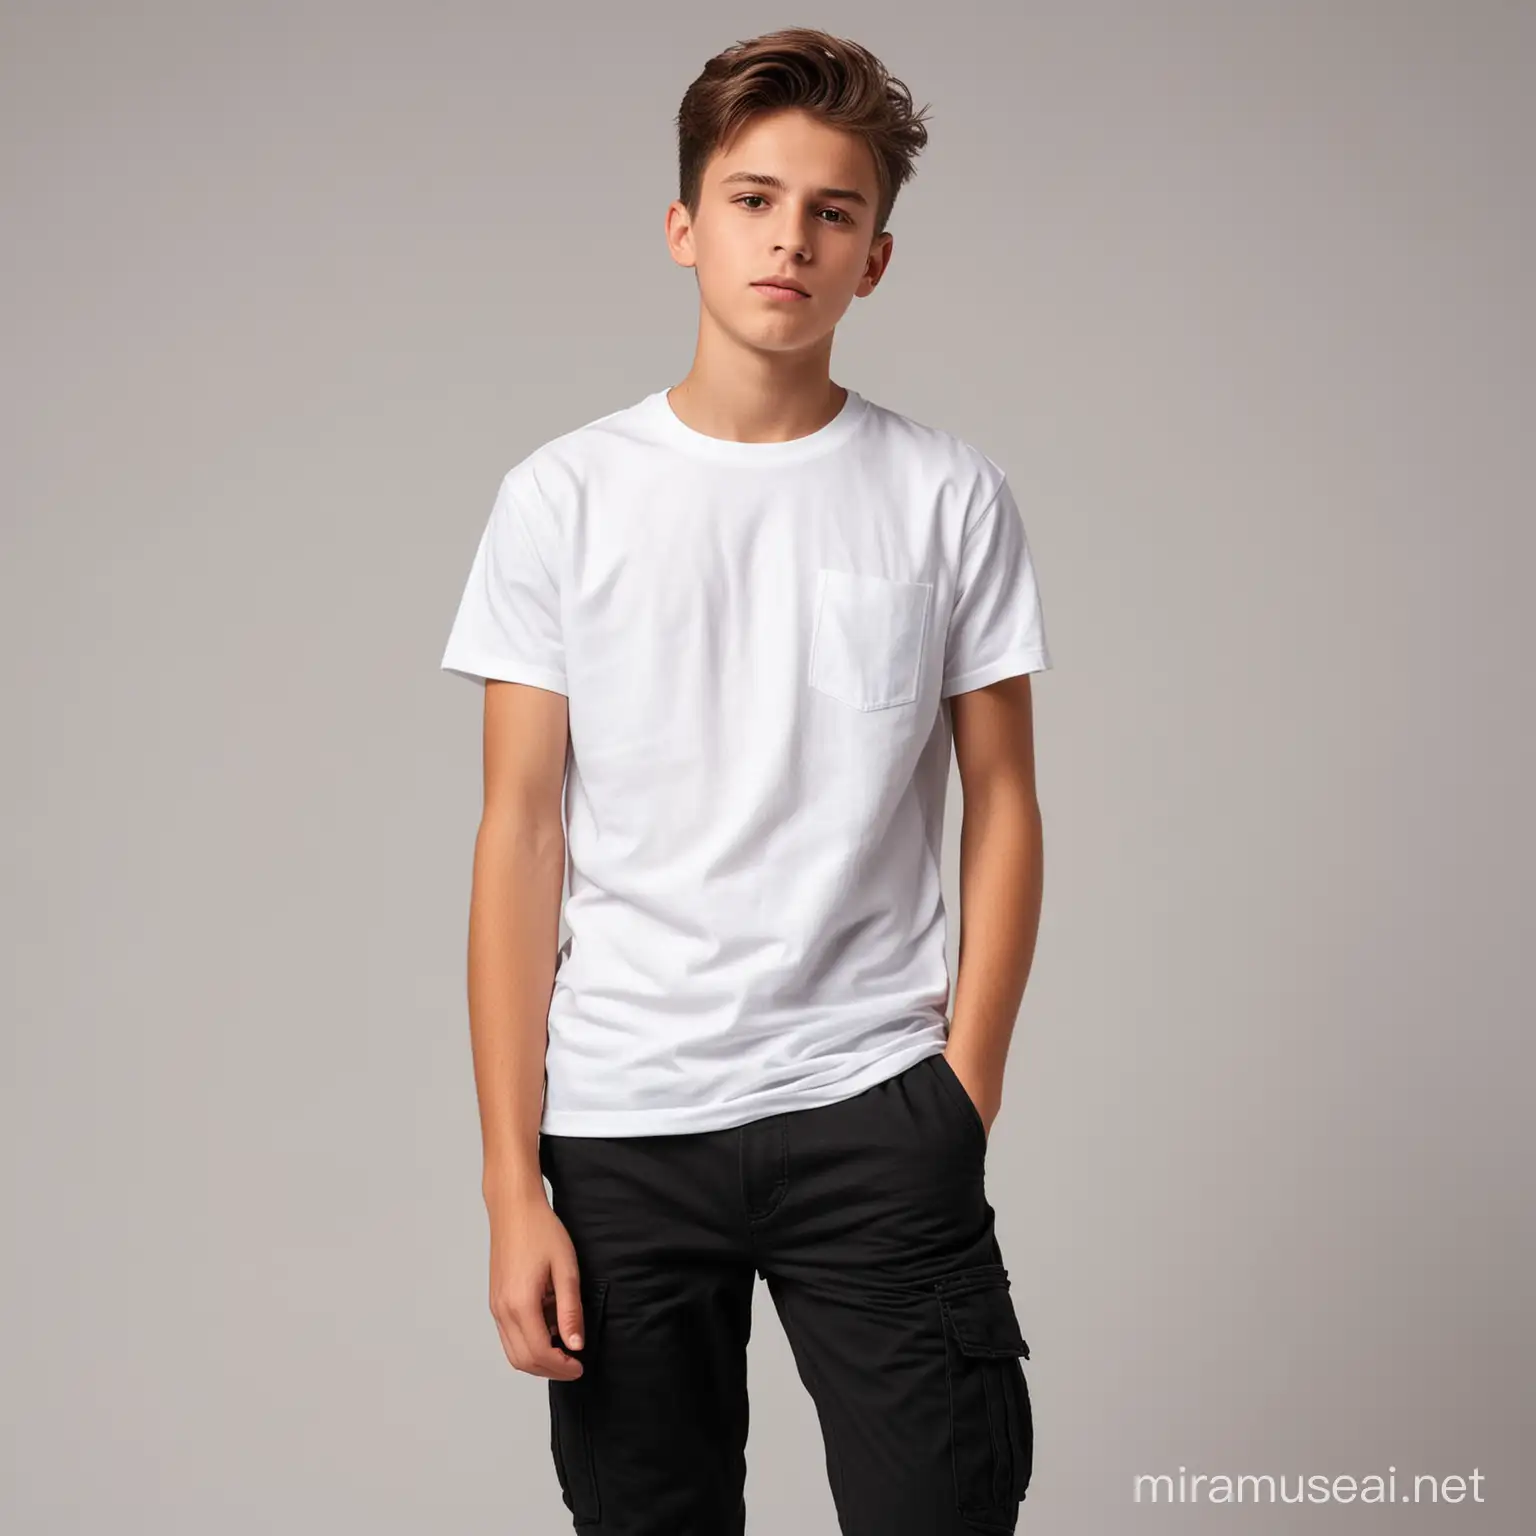 teenager boy, using a t-shirt with classic fit and crew neck, wearing black cargo pants, photographic background white